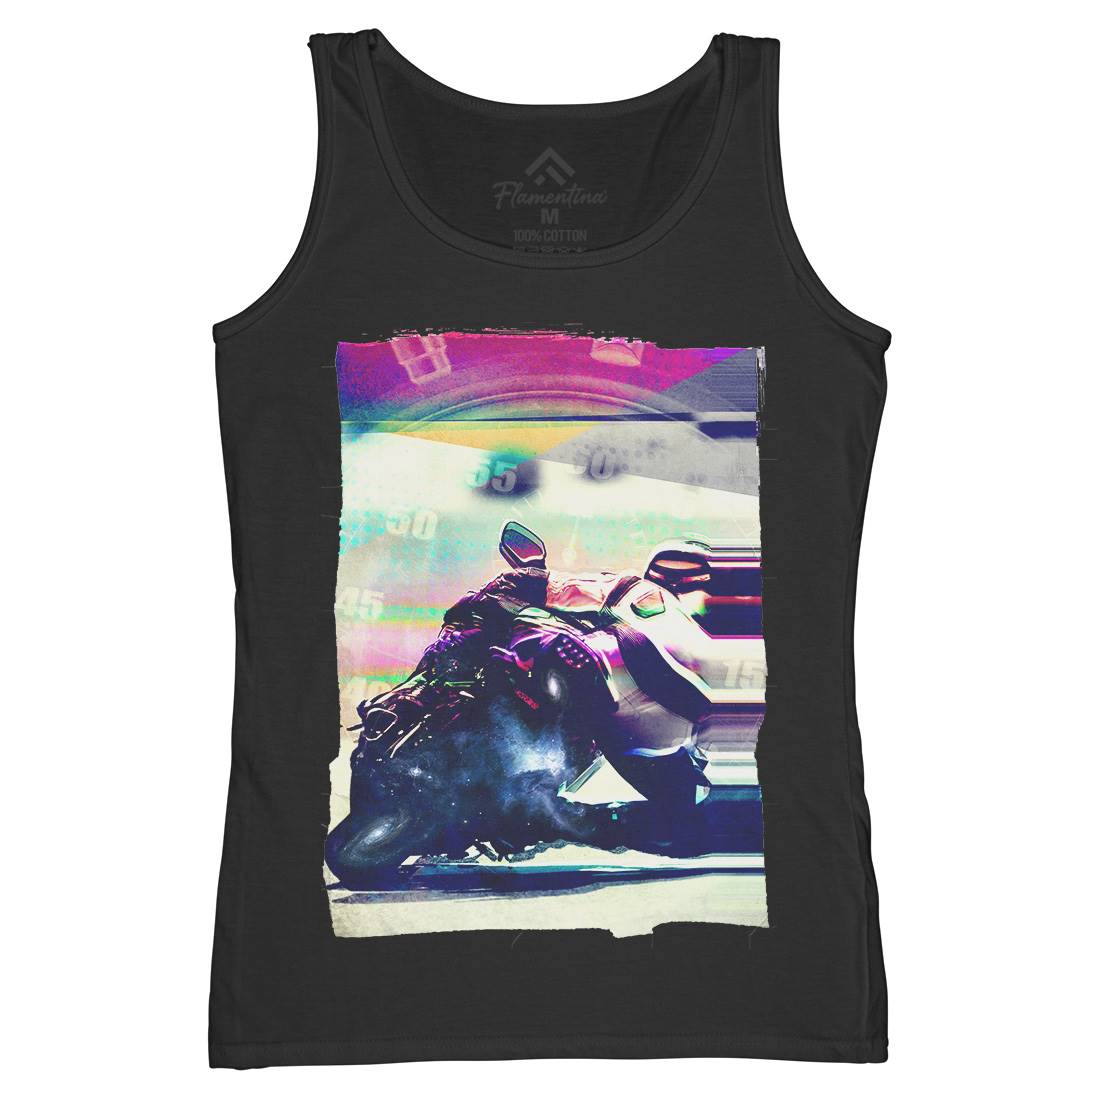 On Time Womens Organic Tank Top Vest Motorcycles A891